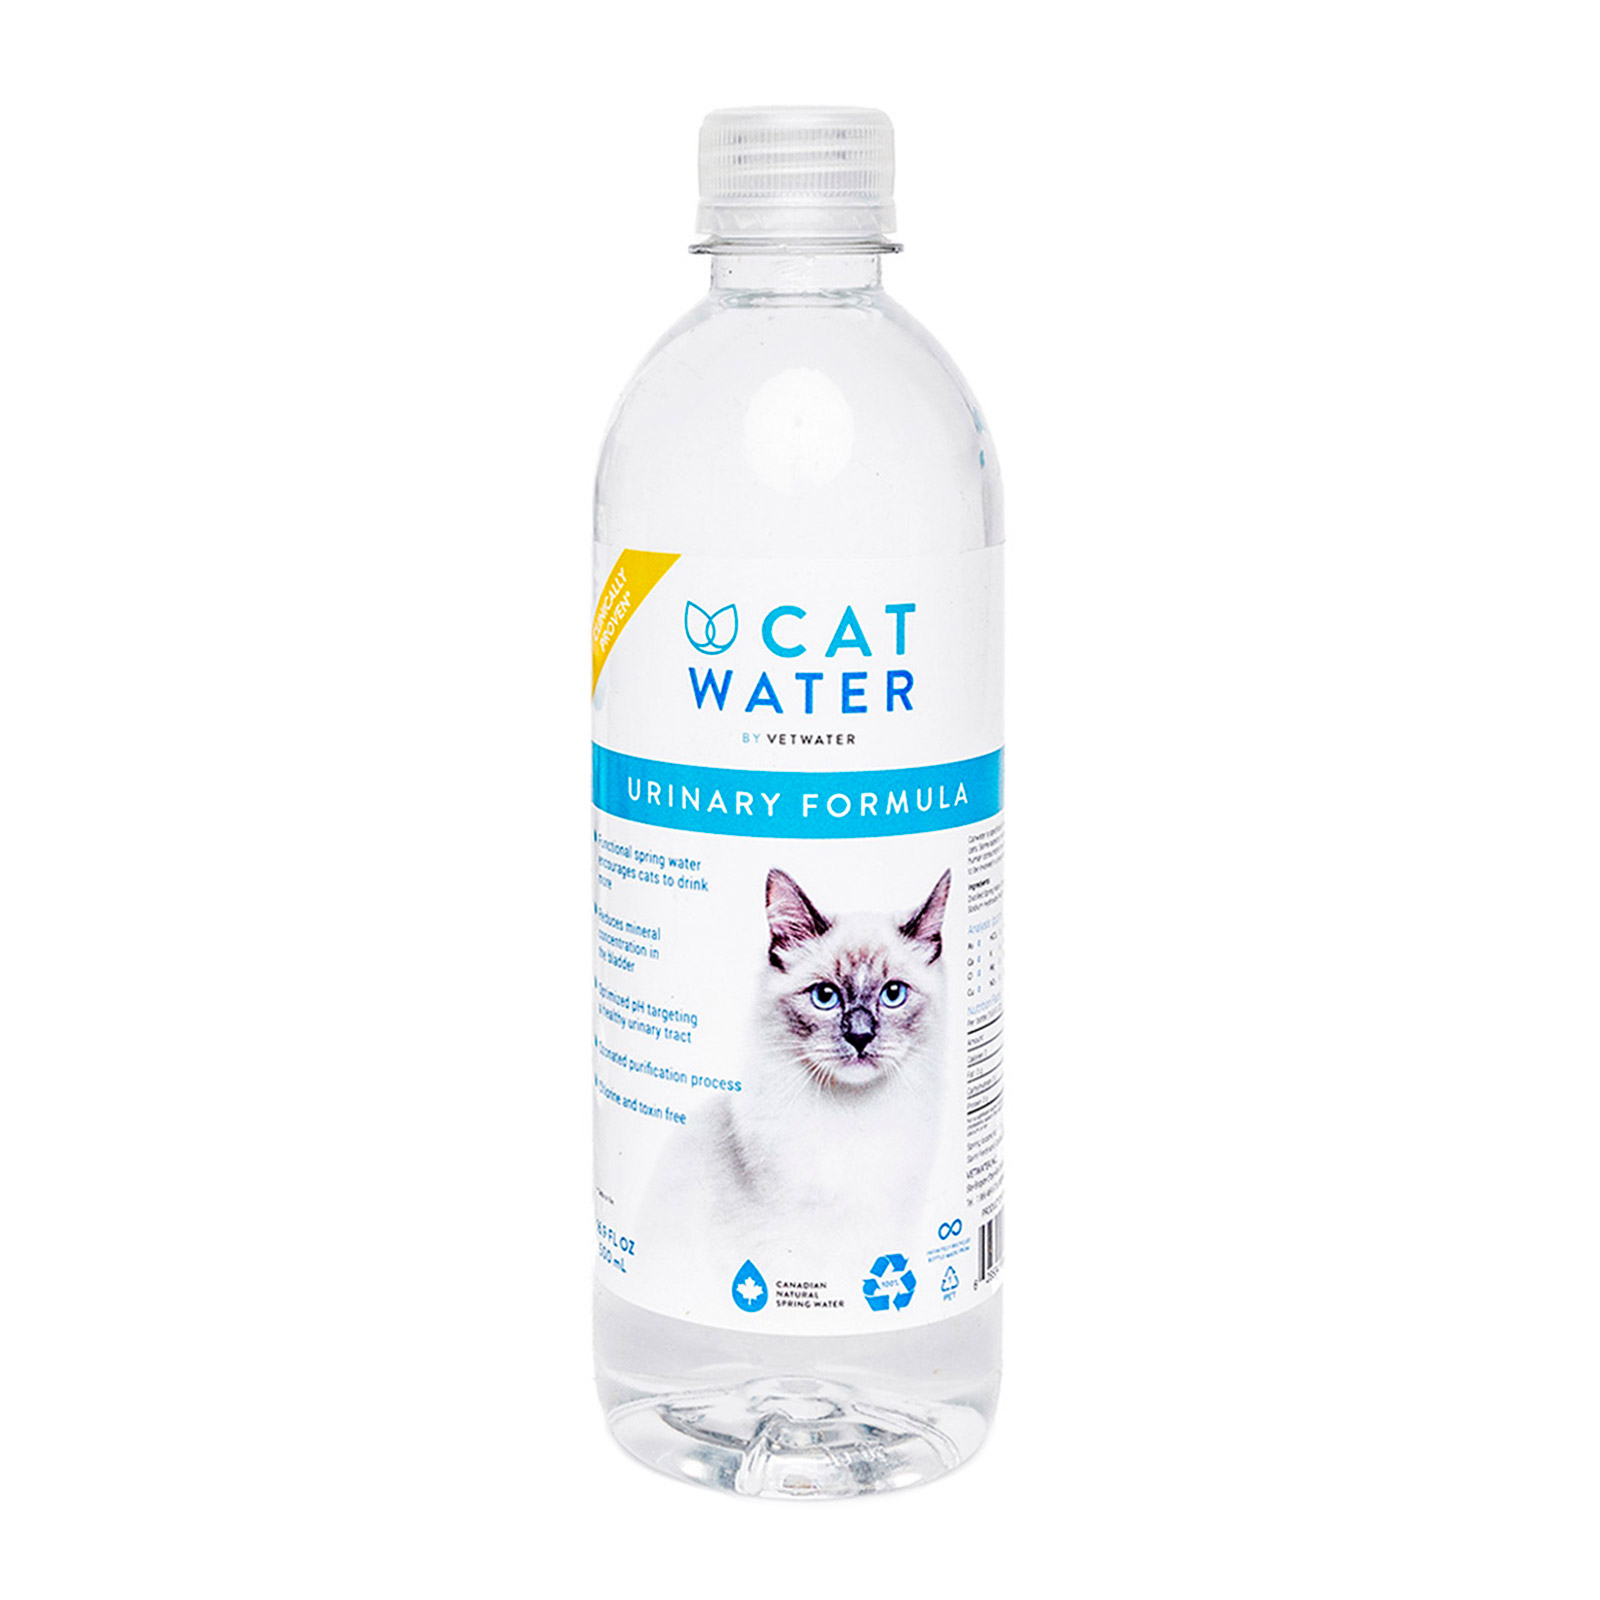 Catwater pH Balanced Urinary Formula by VetWater for Cats